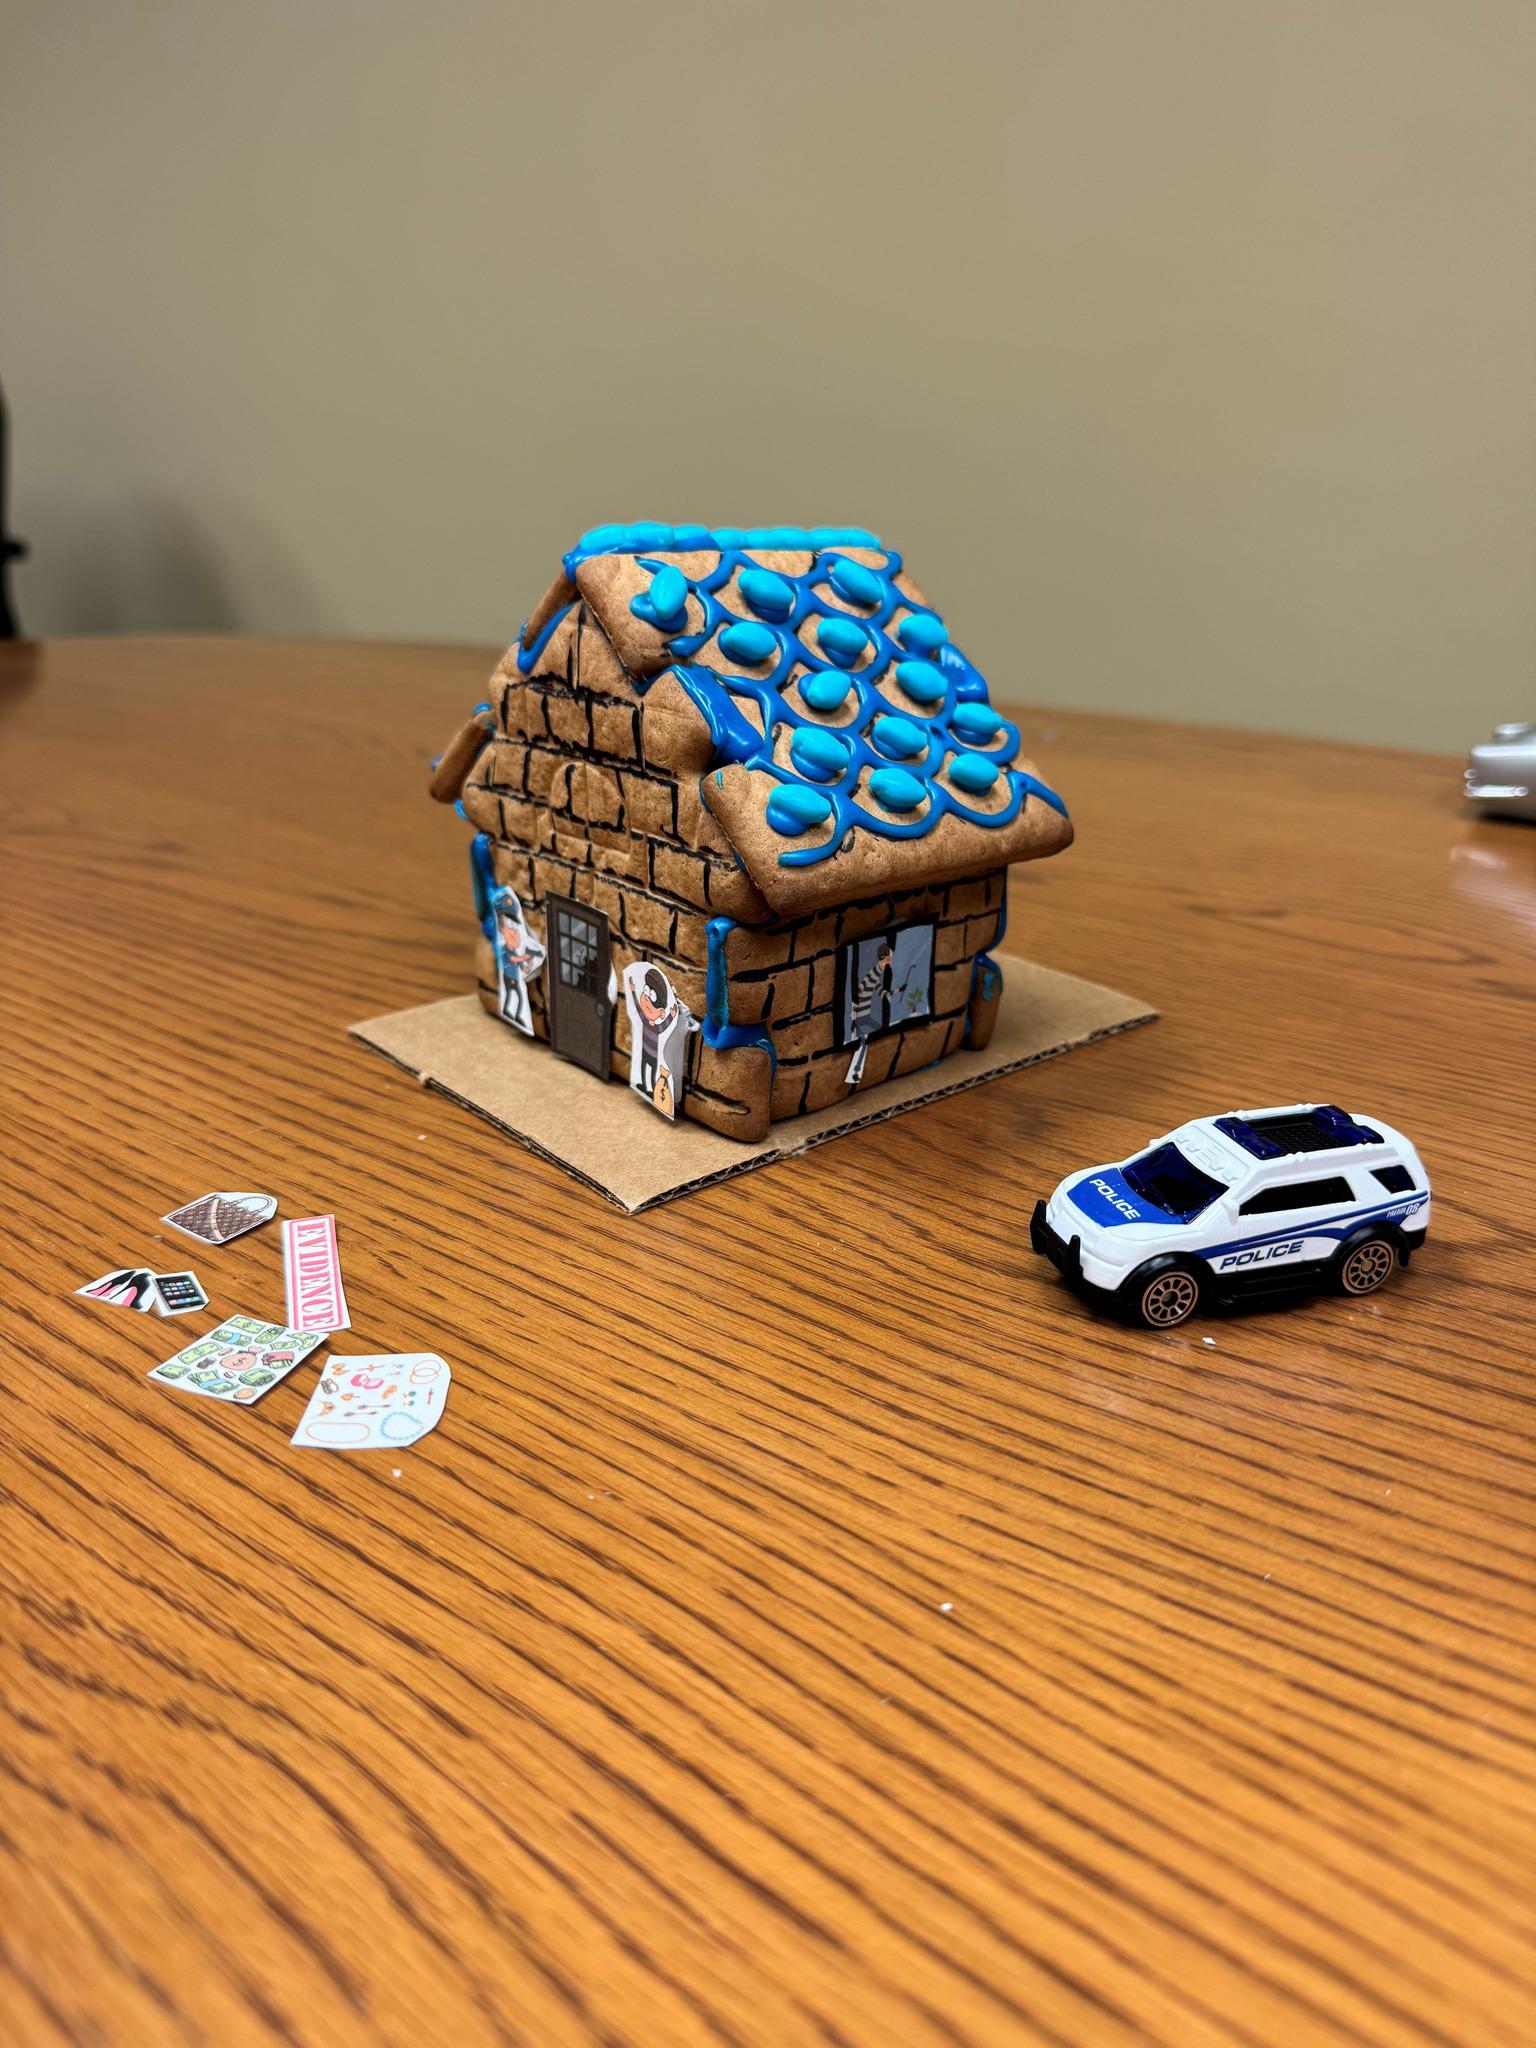 #nationalgingerbreadhouseday 
It's Christmas Season here at the office with our Disaster neighborhood! Watch for these perils, and make sure State Farm protects you and your family!
Please comment below which house is your favorite so we can reward our winning team member! 🎄🎅